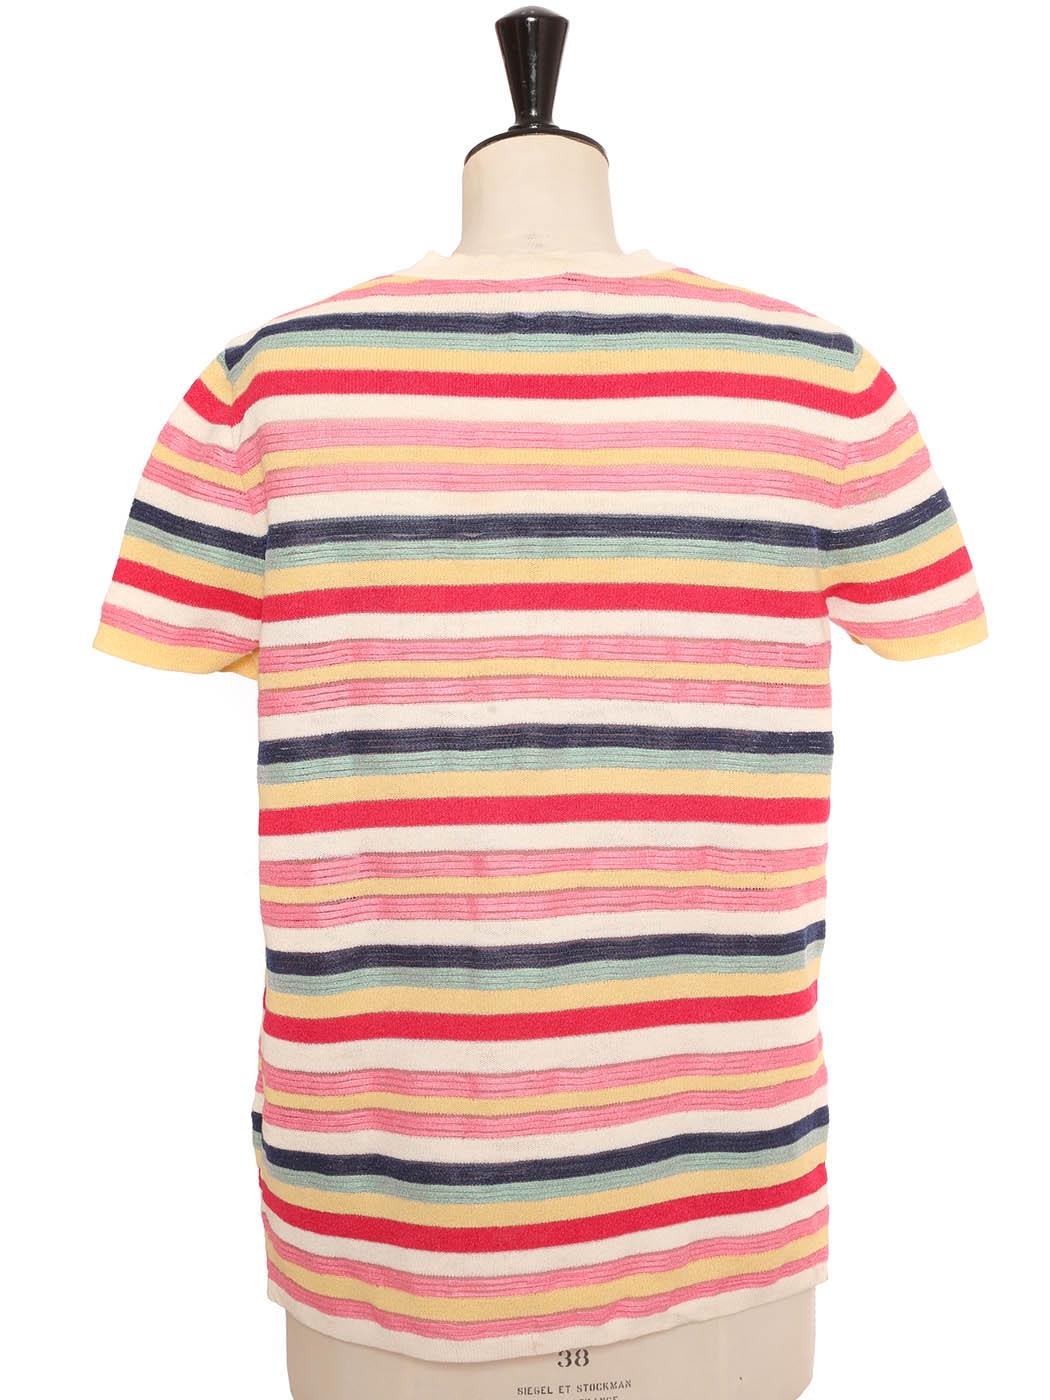 Chanel Striped Short Sleeve T-Shirts